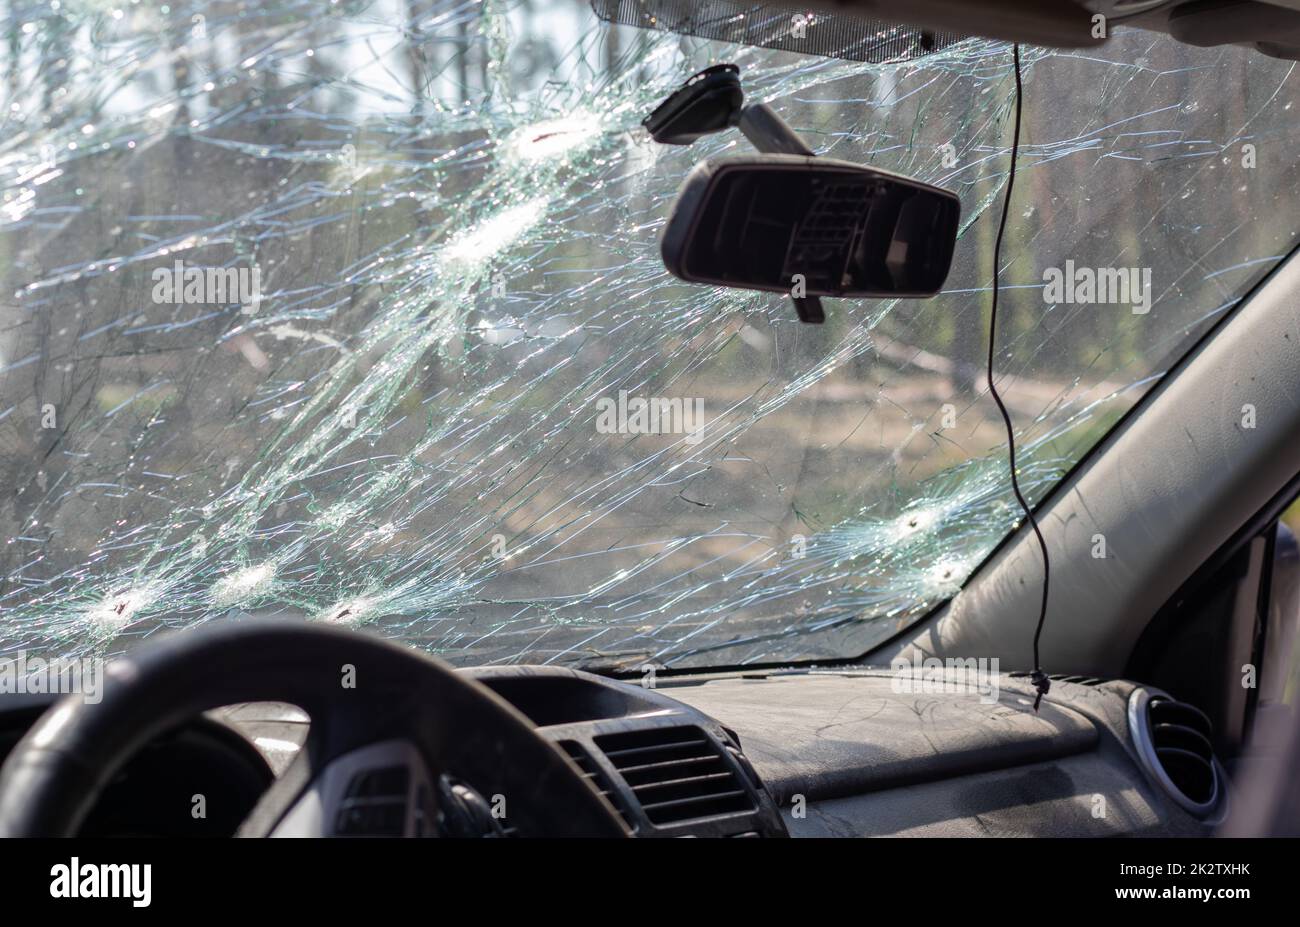 Broken windshield of a car from a bullet, from a shot from a firearm, view from the inside of the cabin. Damaged glass with traces of an oncoming stone on the road. Interior view of the car. Stock Photo